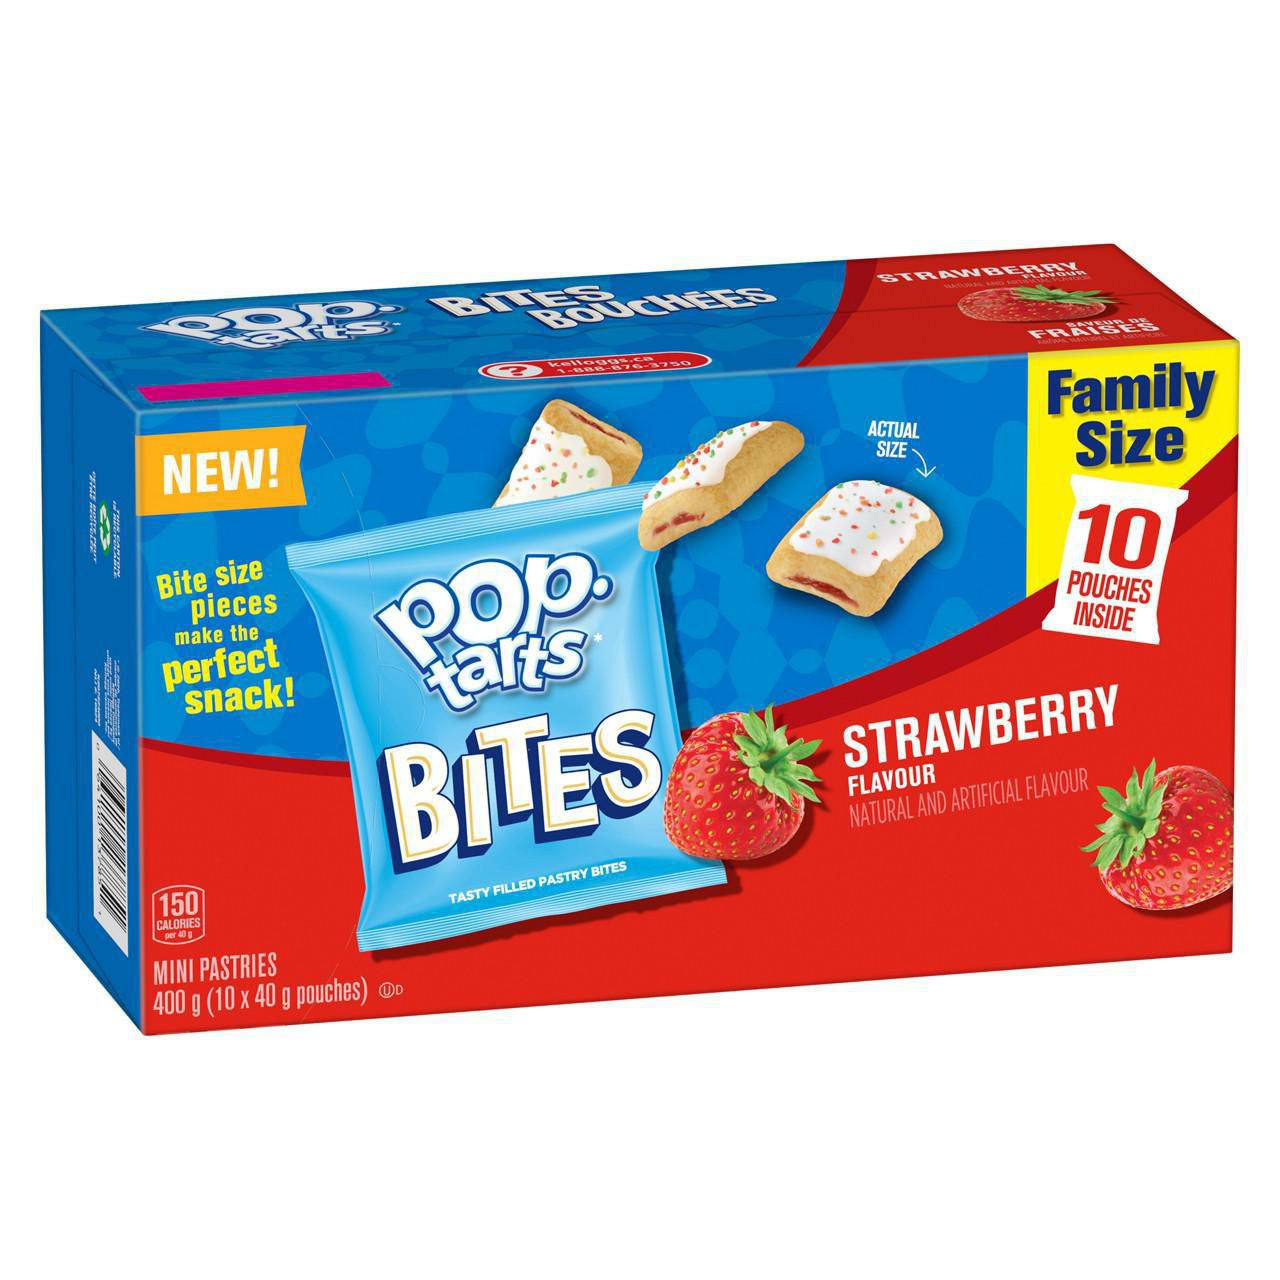 Kellogg's Pop-Tarts Bites, Mini Pastries Strawberry Flavour, 10 pouches, 400g/14.1 oz., {Imported from Canada}